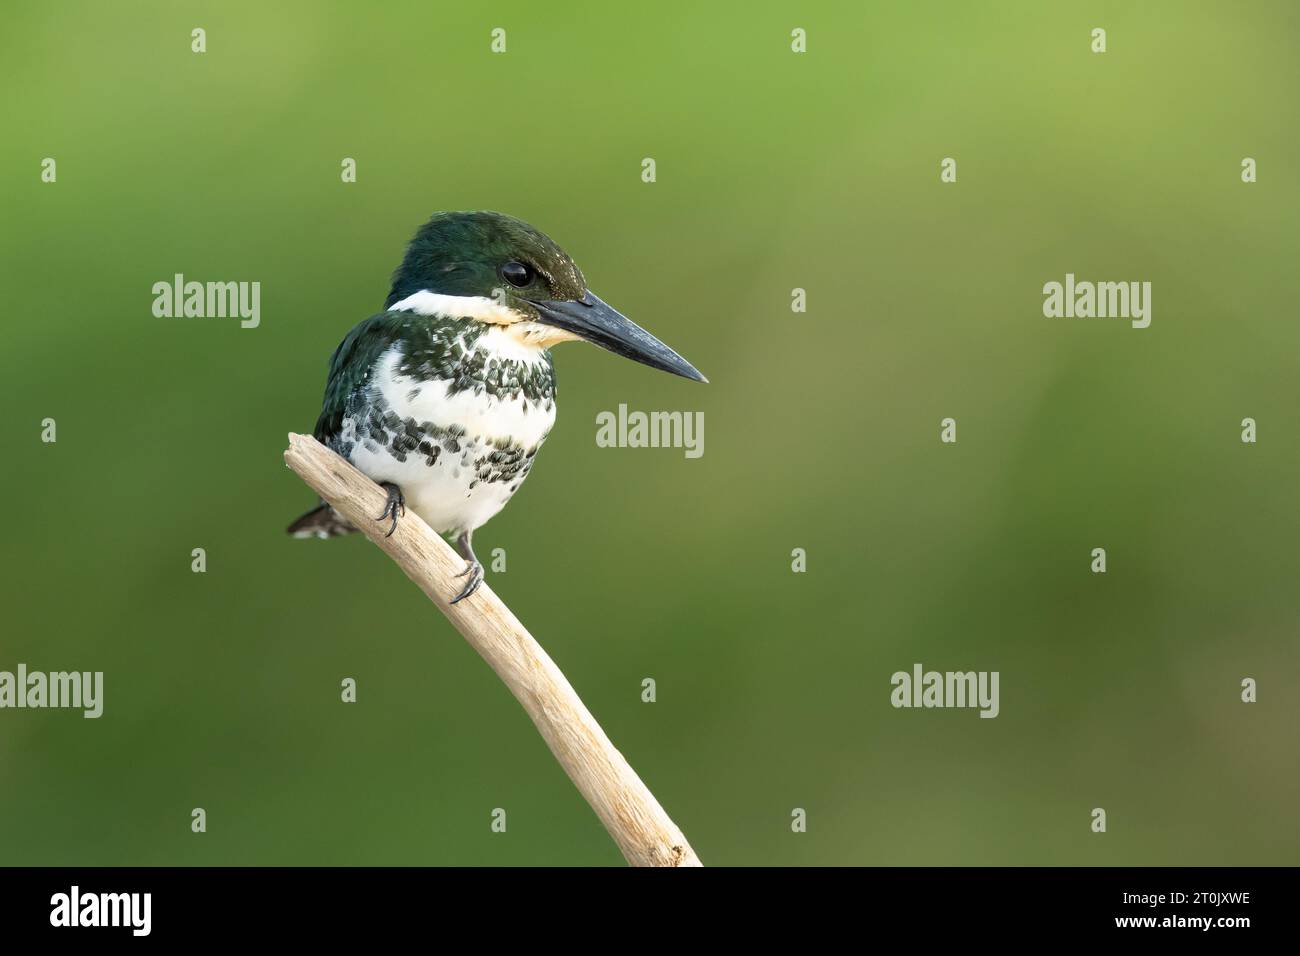 Green kingfisher (Chloroceryle americana) is a species of 'water kingfisher' in the subfamily Cerylinae of the family Alcedinidae. Stock Photo